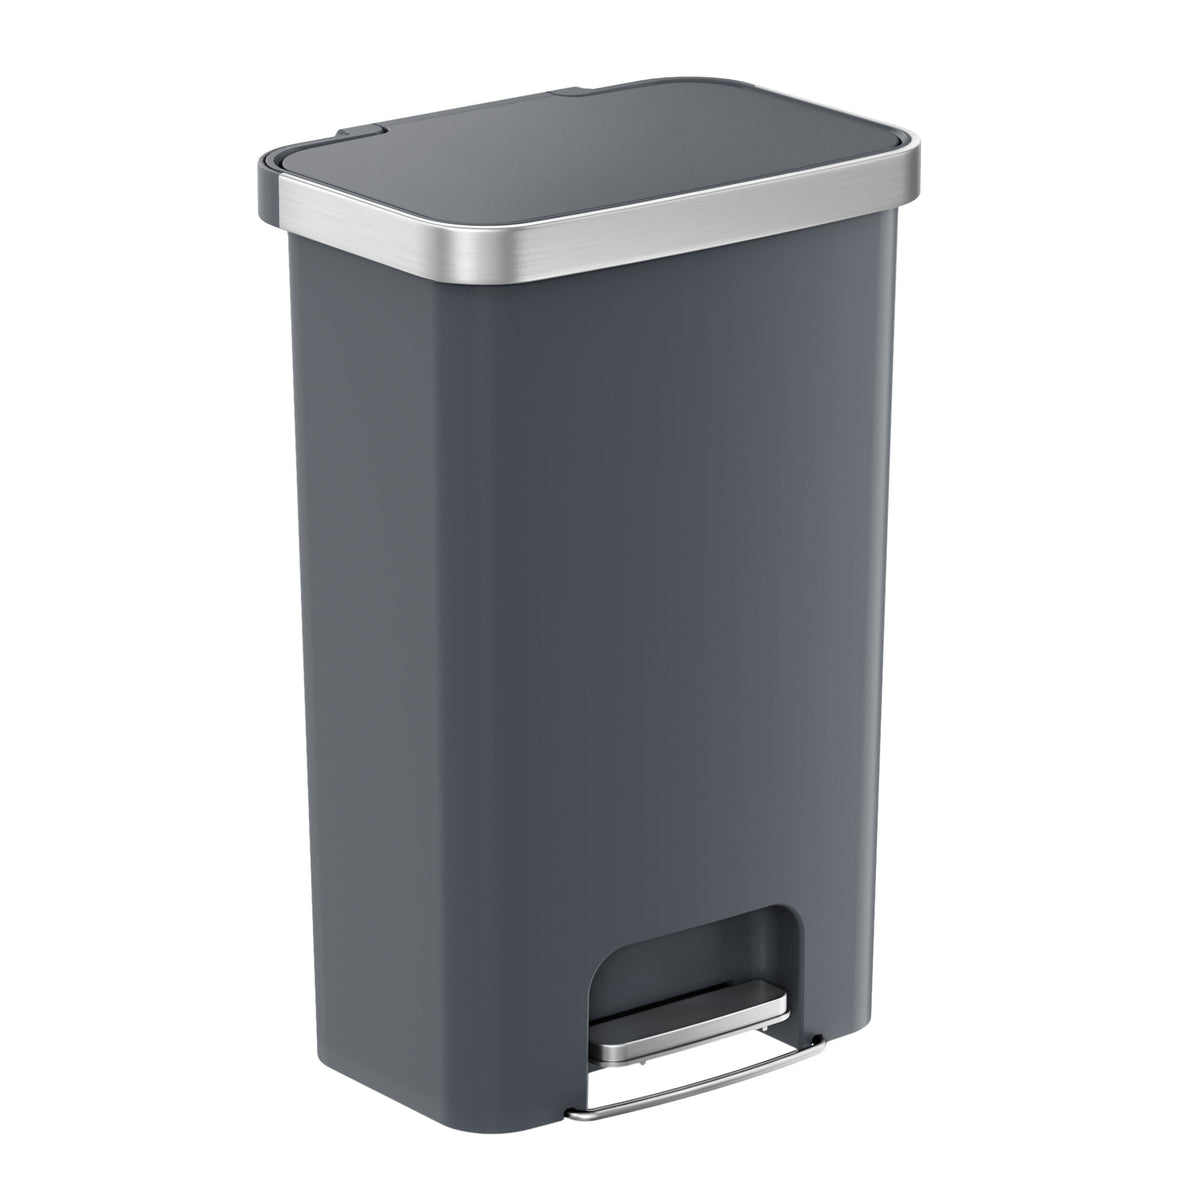 13.2 Gallon / 50 Liter SoftStep Prime Step Pedal Trash Can (Gray)